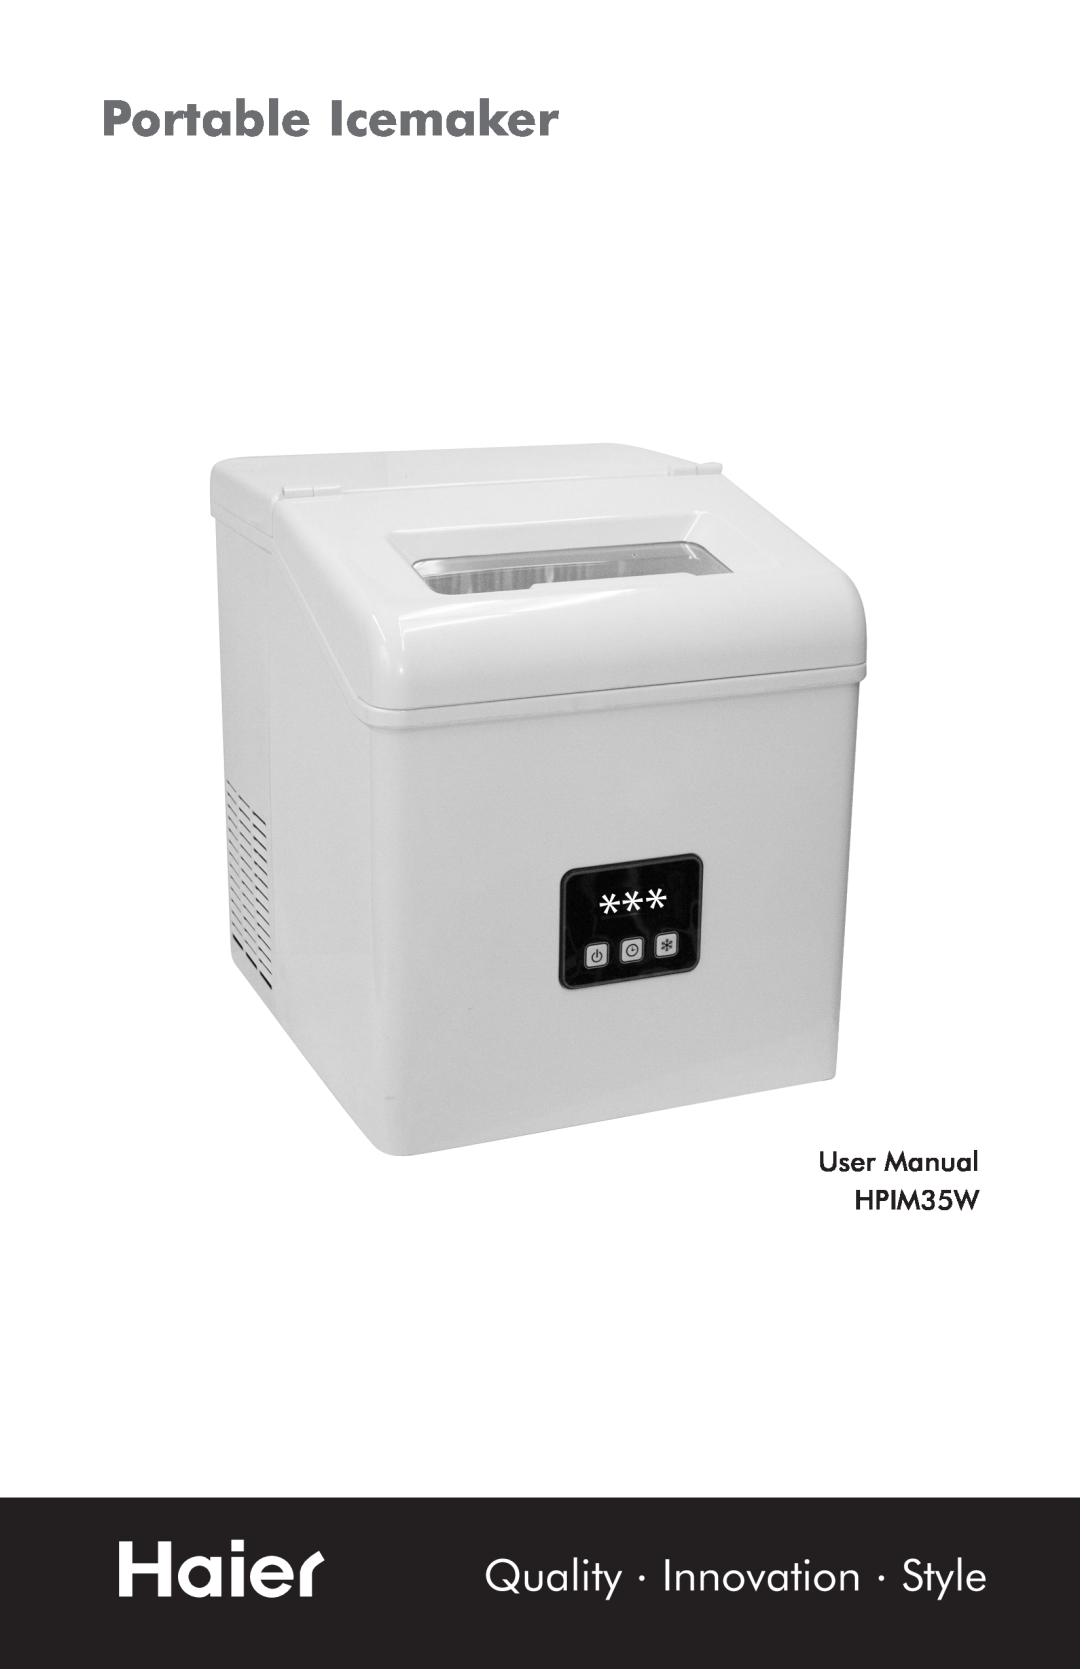 Haier HPIM35W user manual Portable Icemaker, Quality Innovation Style 